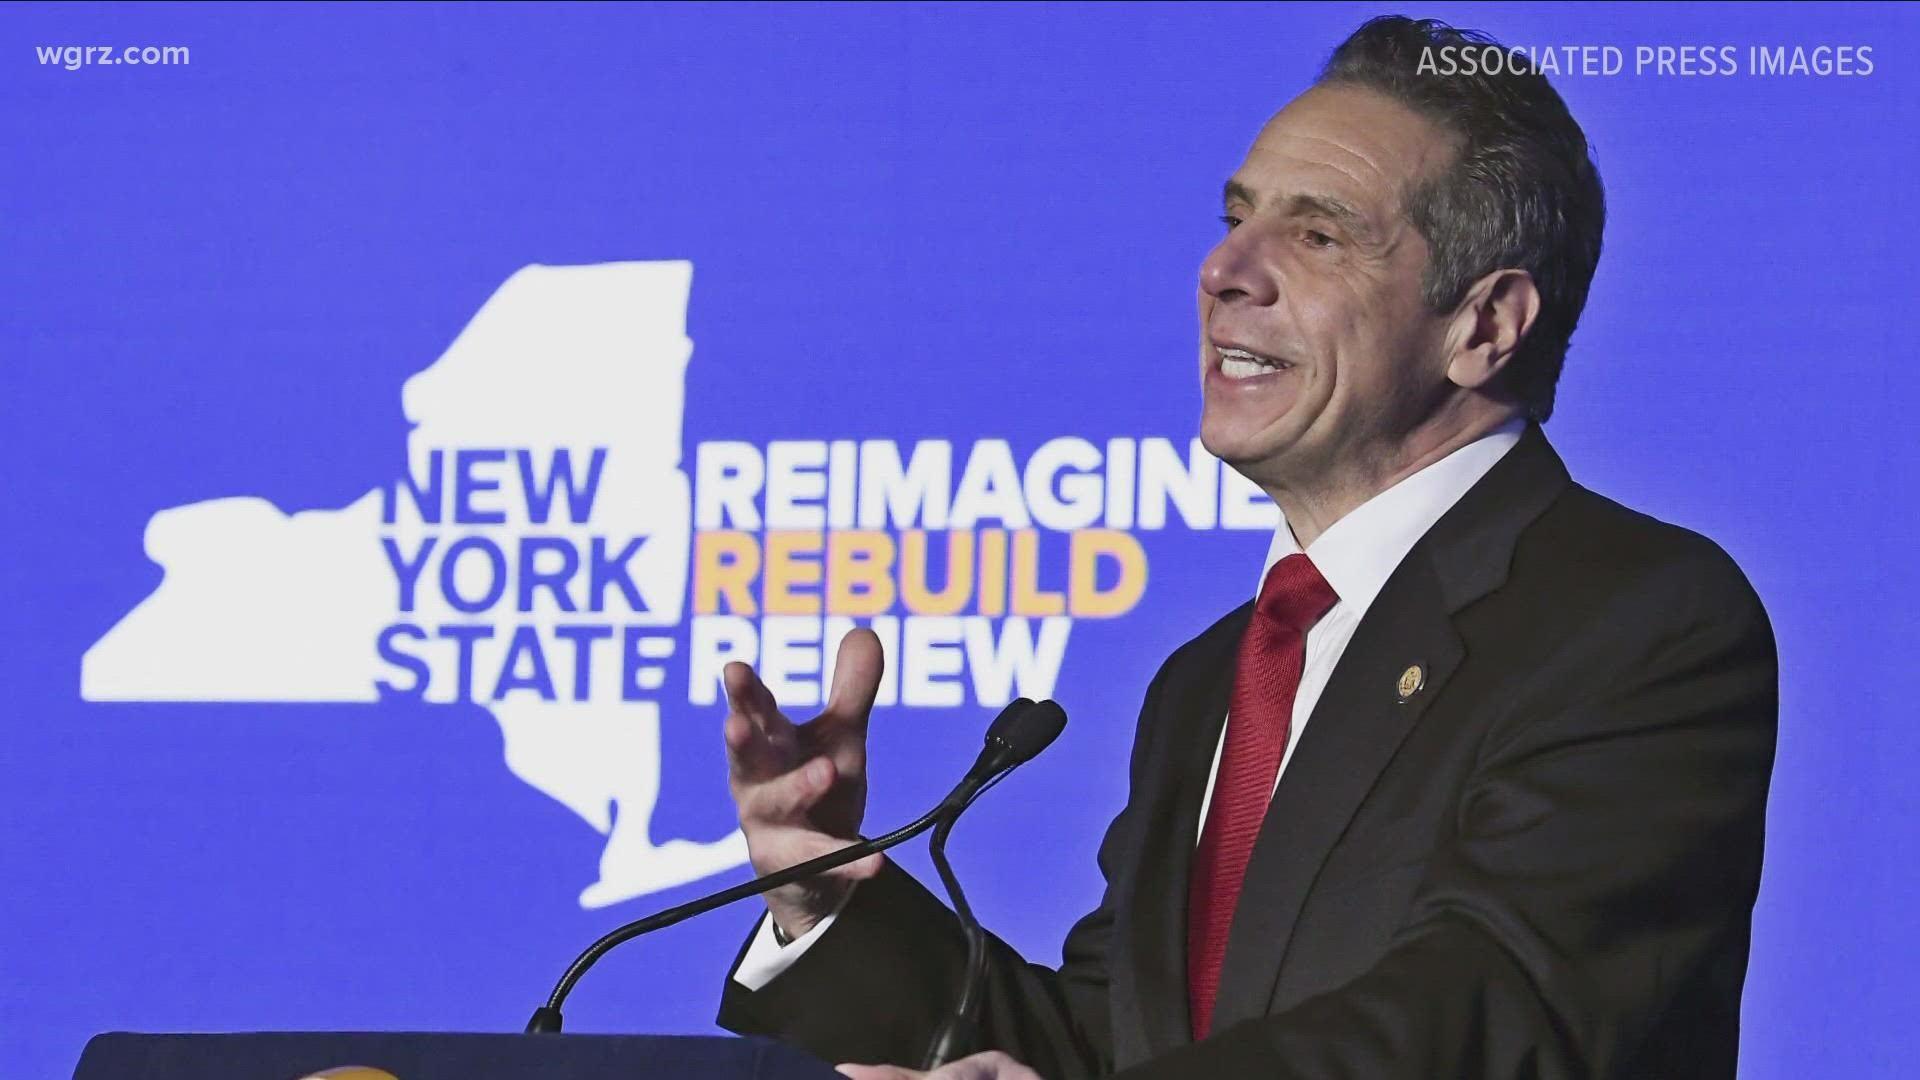 Governor Cuomo of sexual harassment filed a complaint with the Albany County Sheriff's Office Saturday, which could lead to criminal charges against the governor.